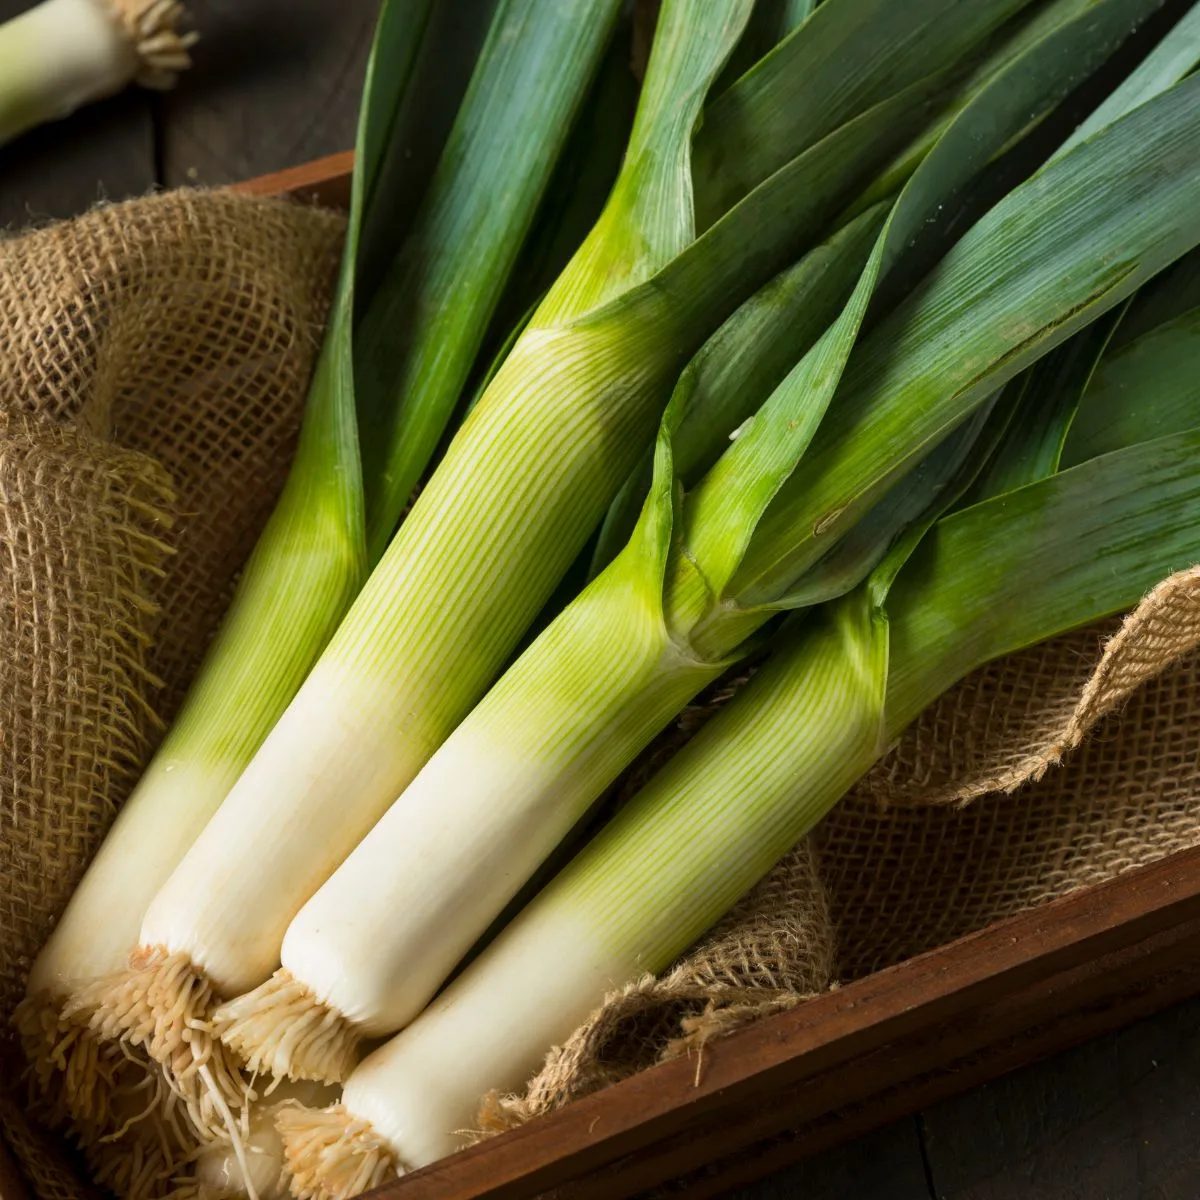 A bunch of leeks in a basket.